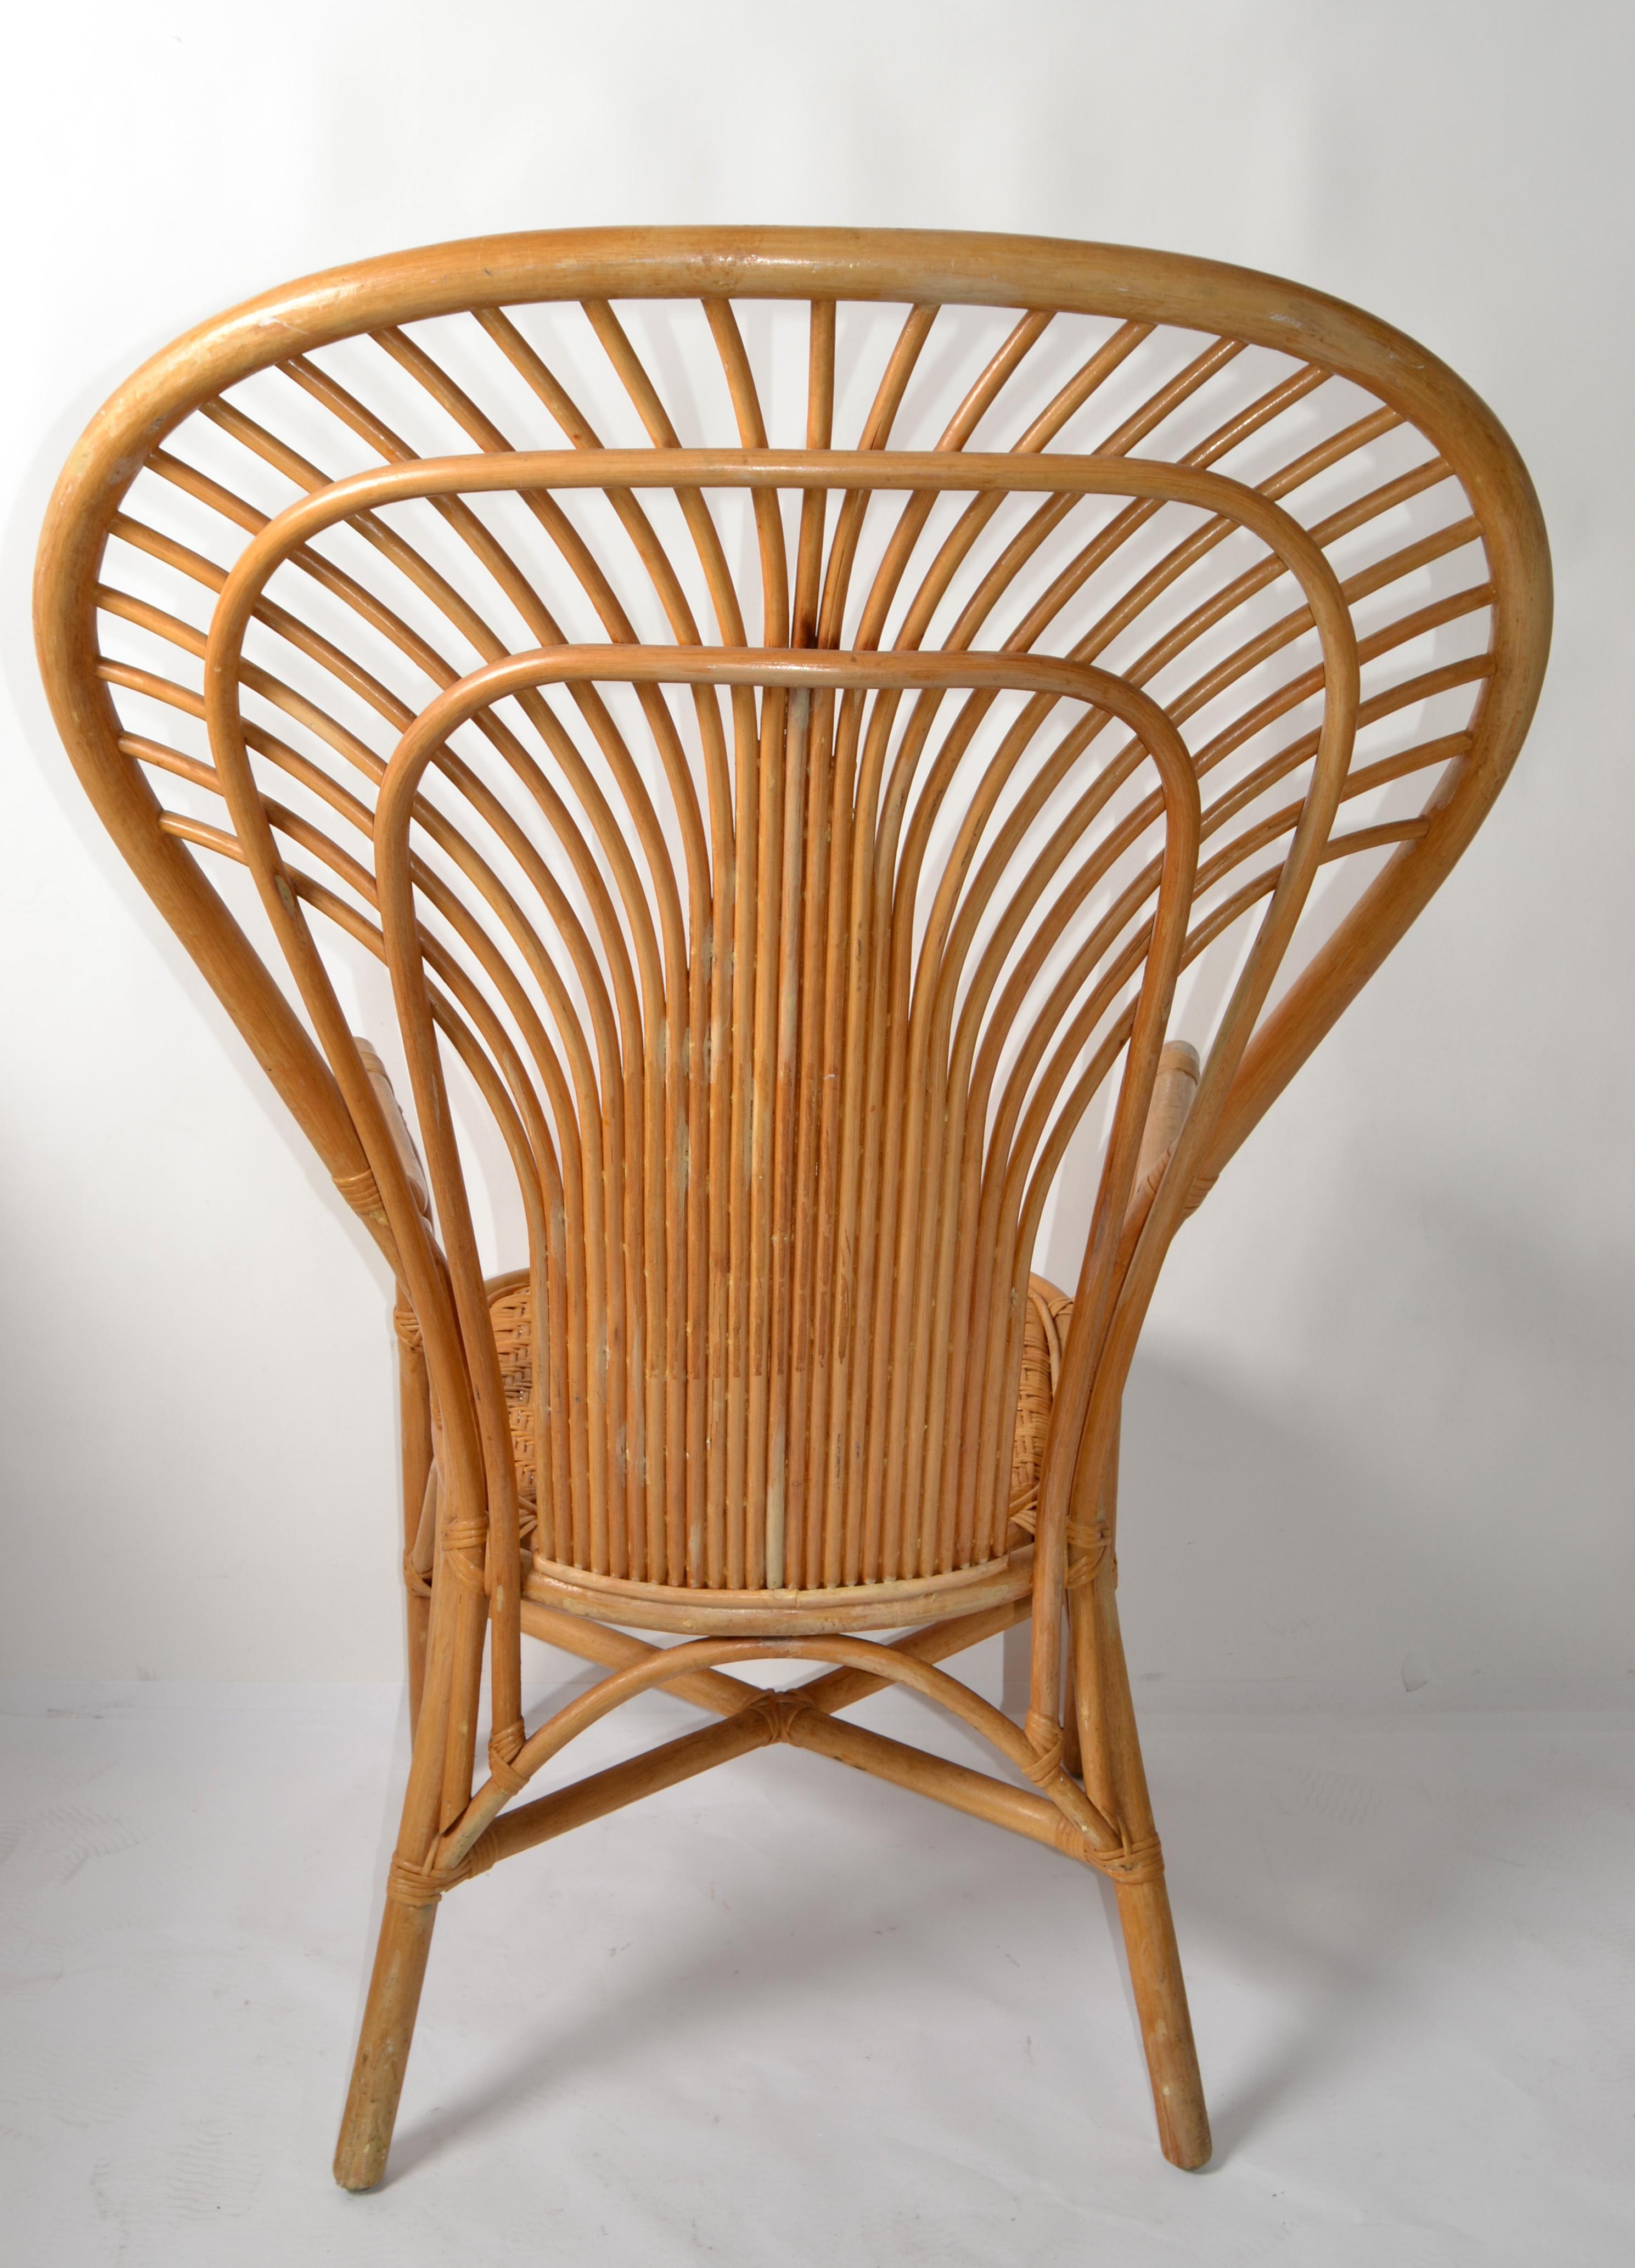 Bohemian Vintage Handcrafted Beige Bamboo Split Reed Caning Rattan Peacock Chair For Sale 2